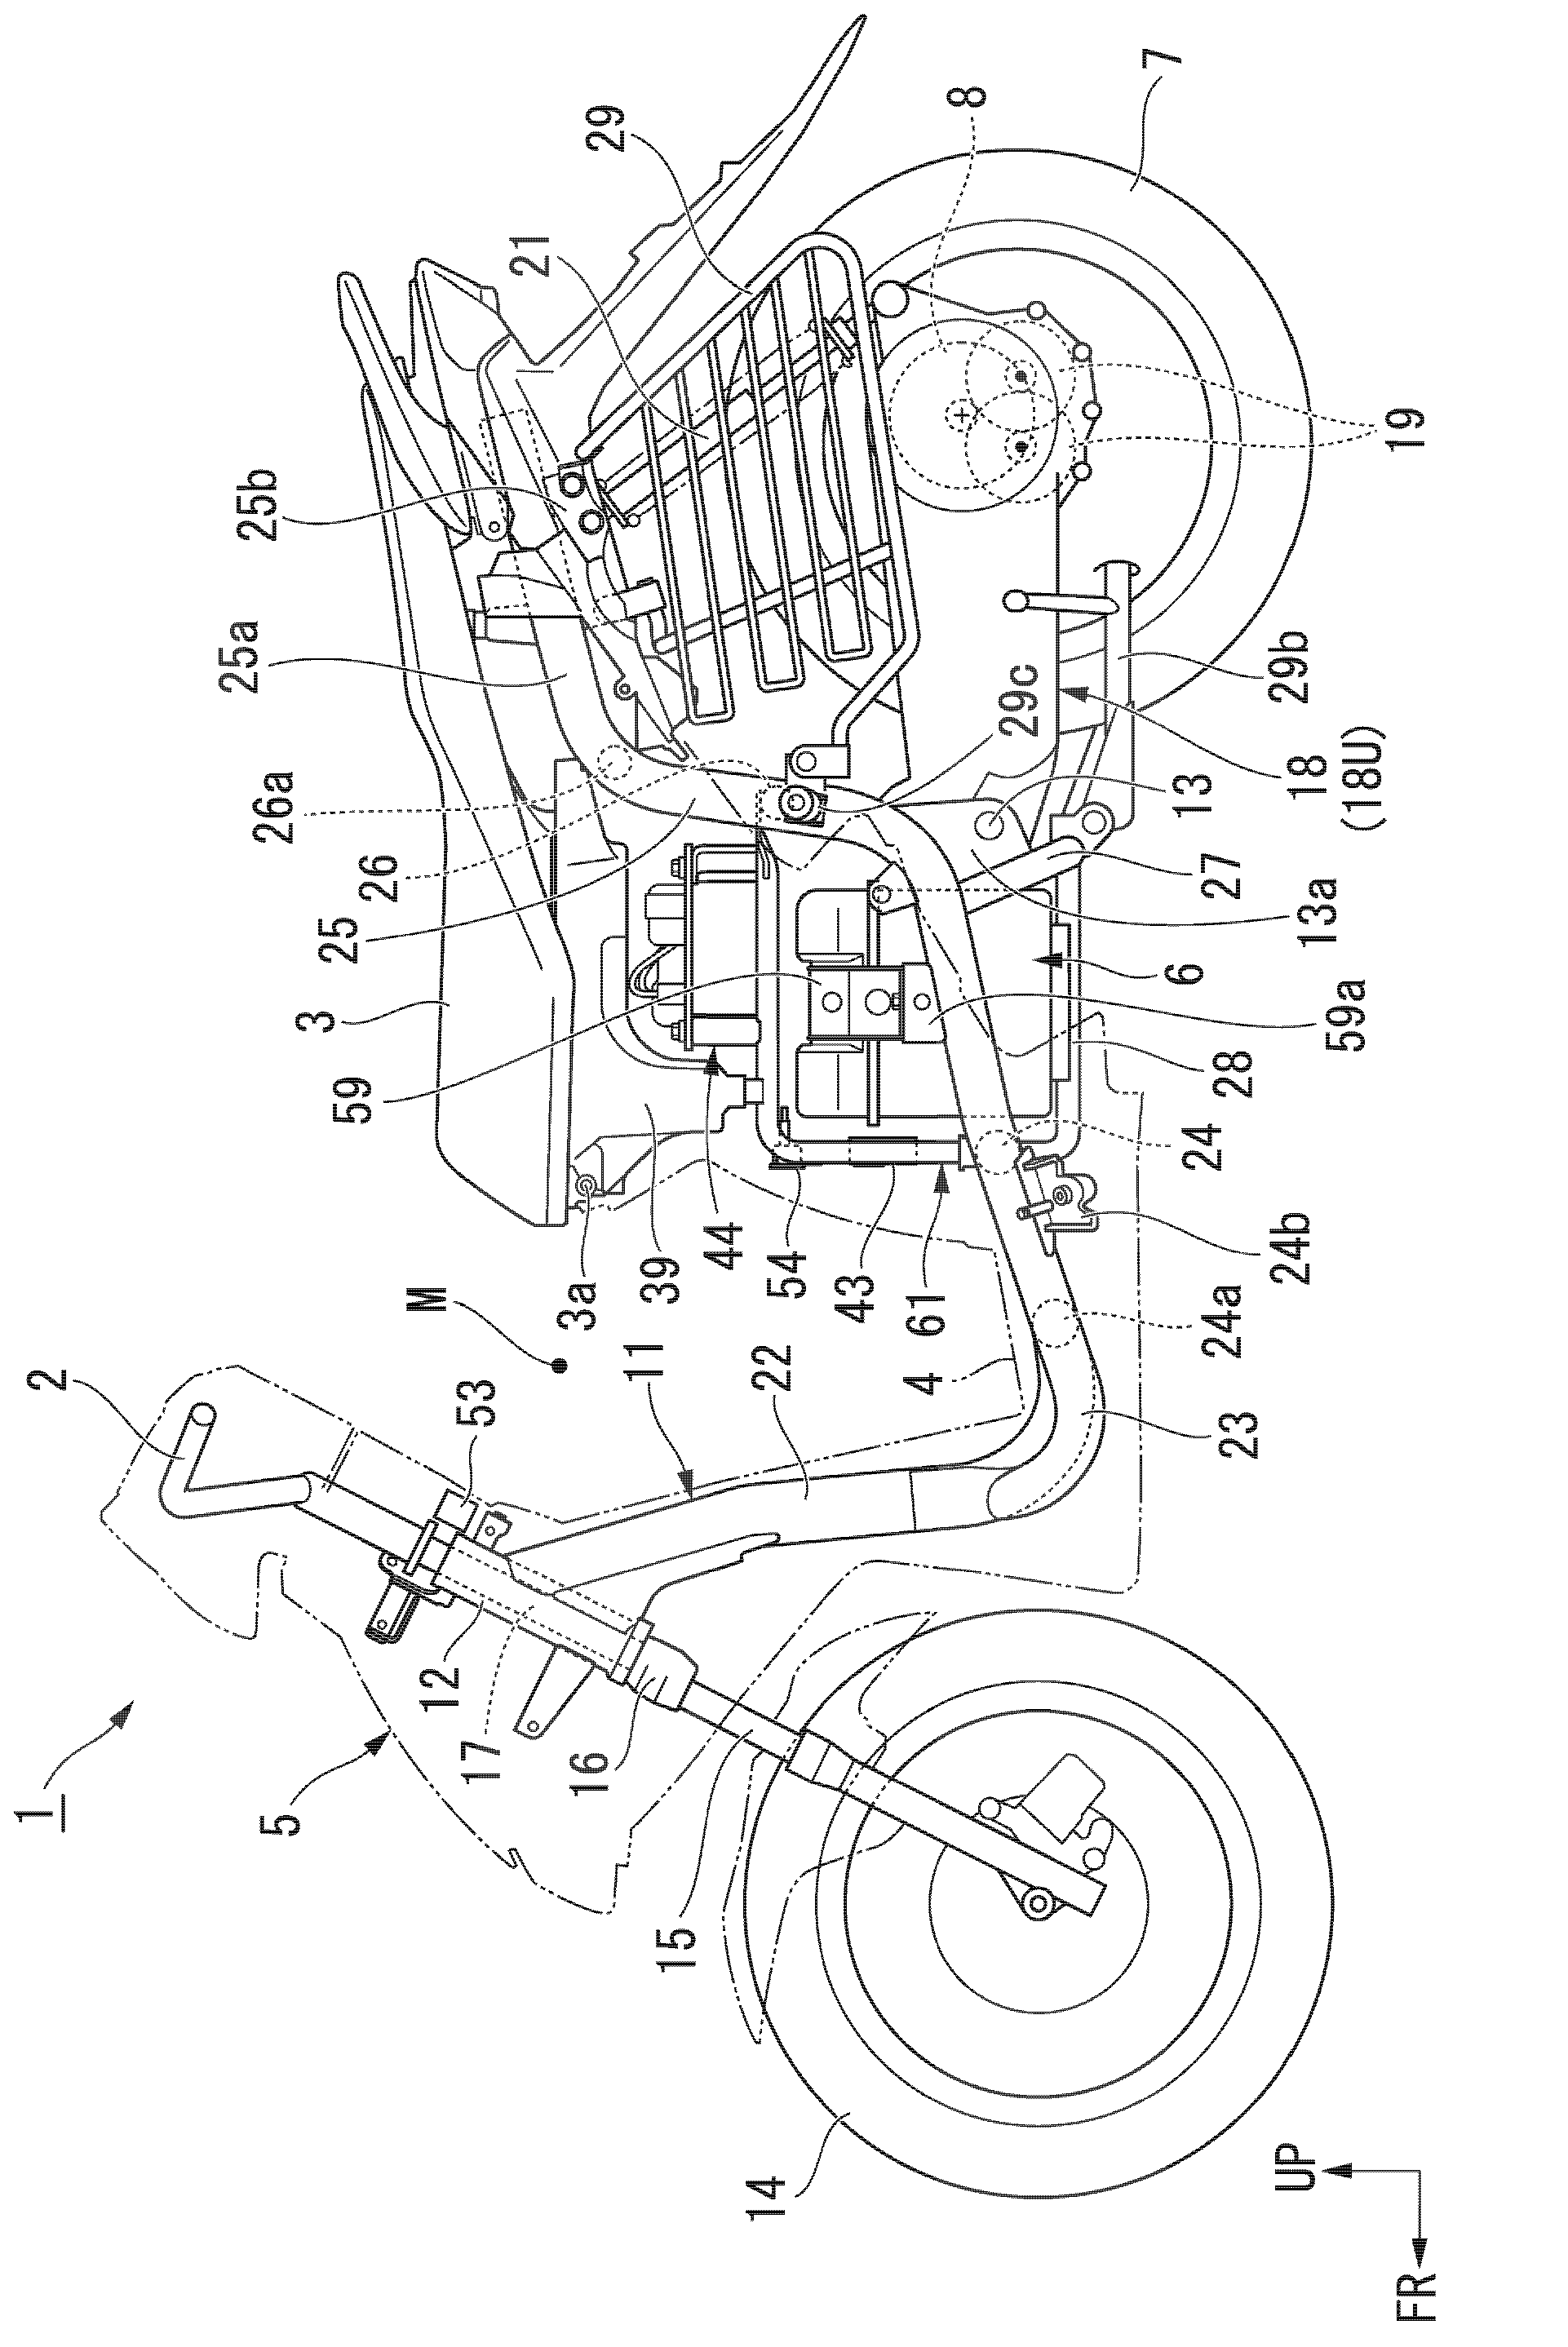 Electric saddled vehicle, and drive device for electric vehicle